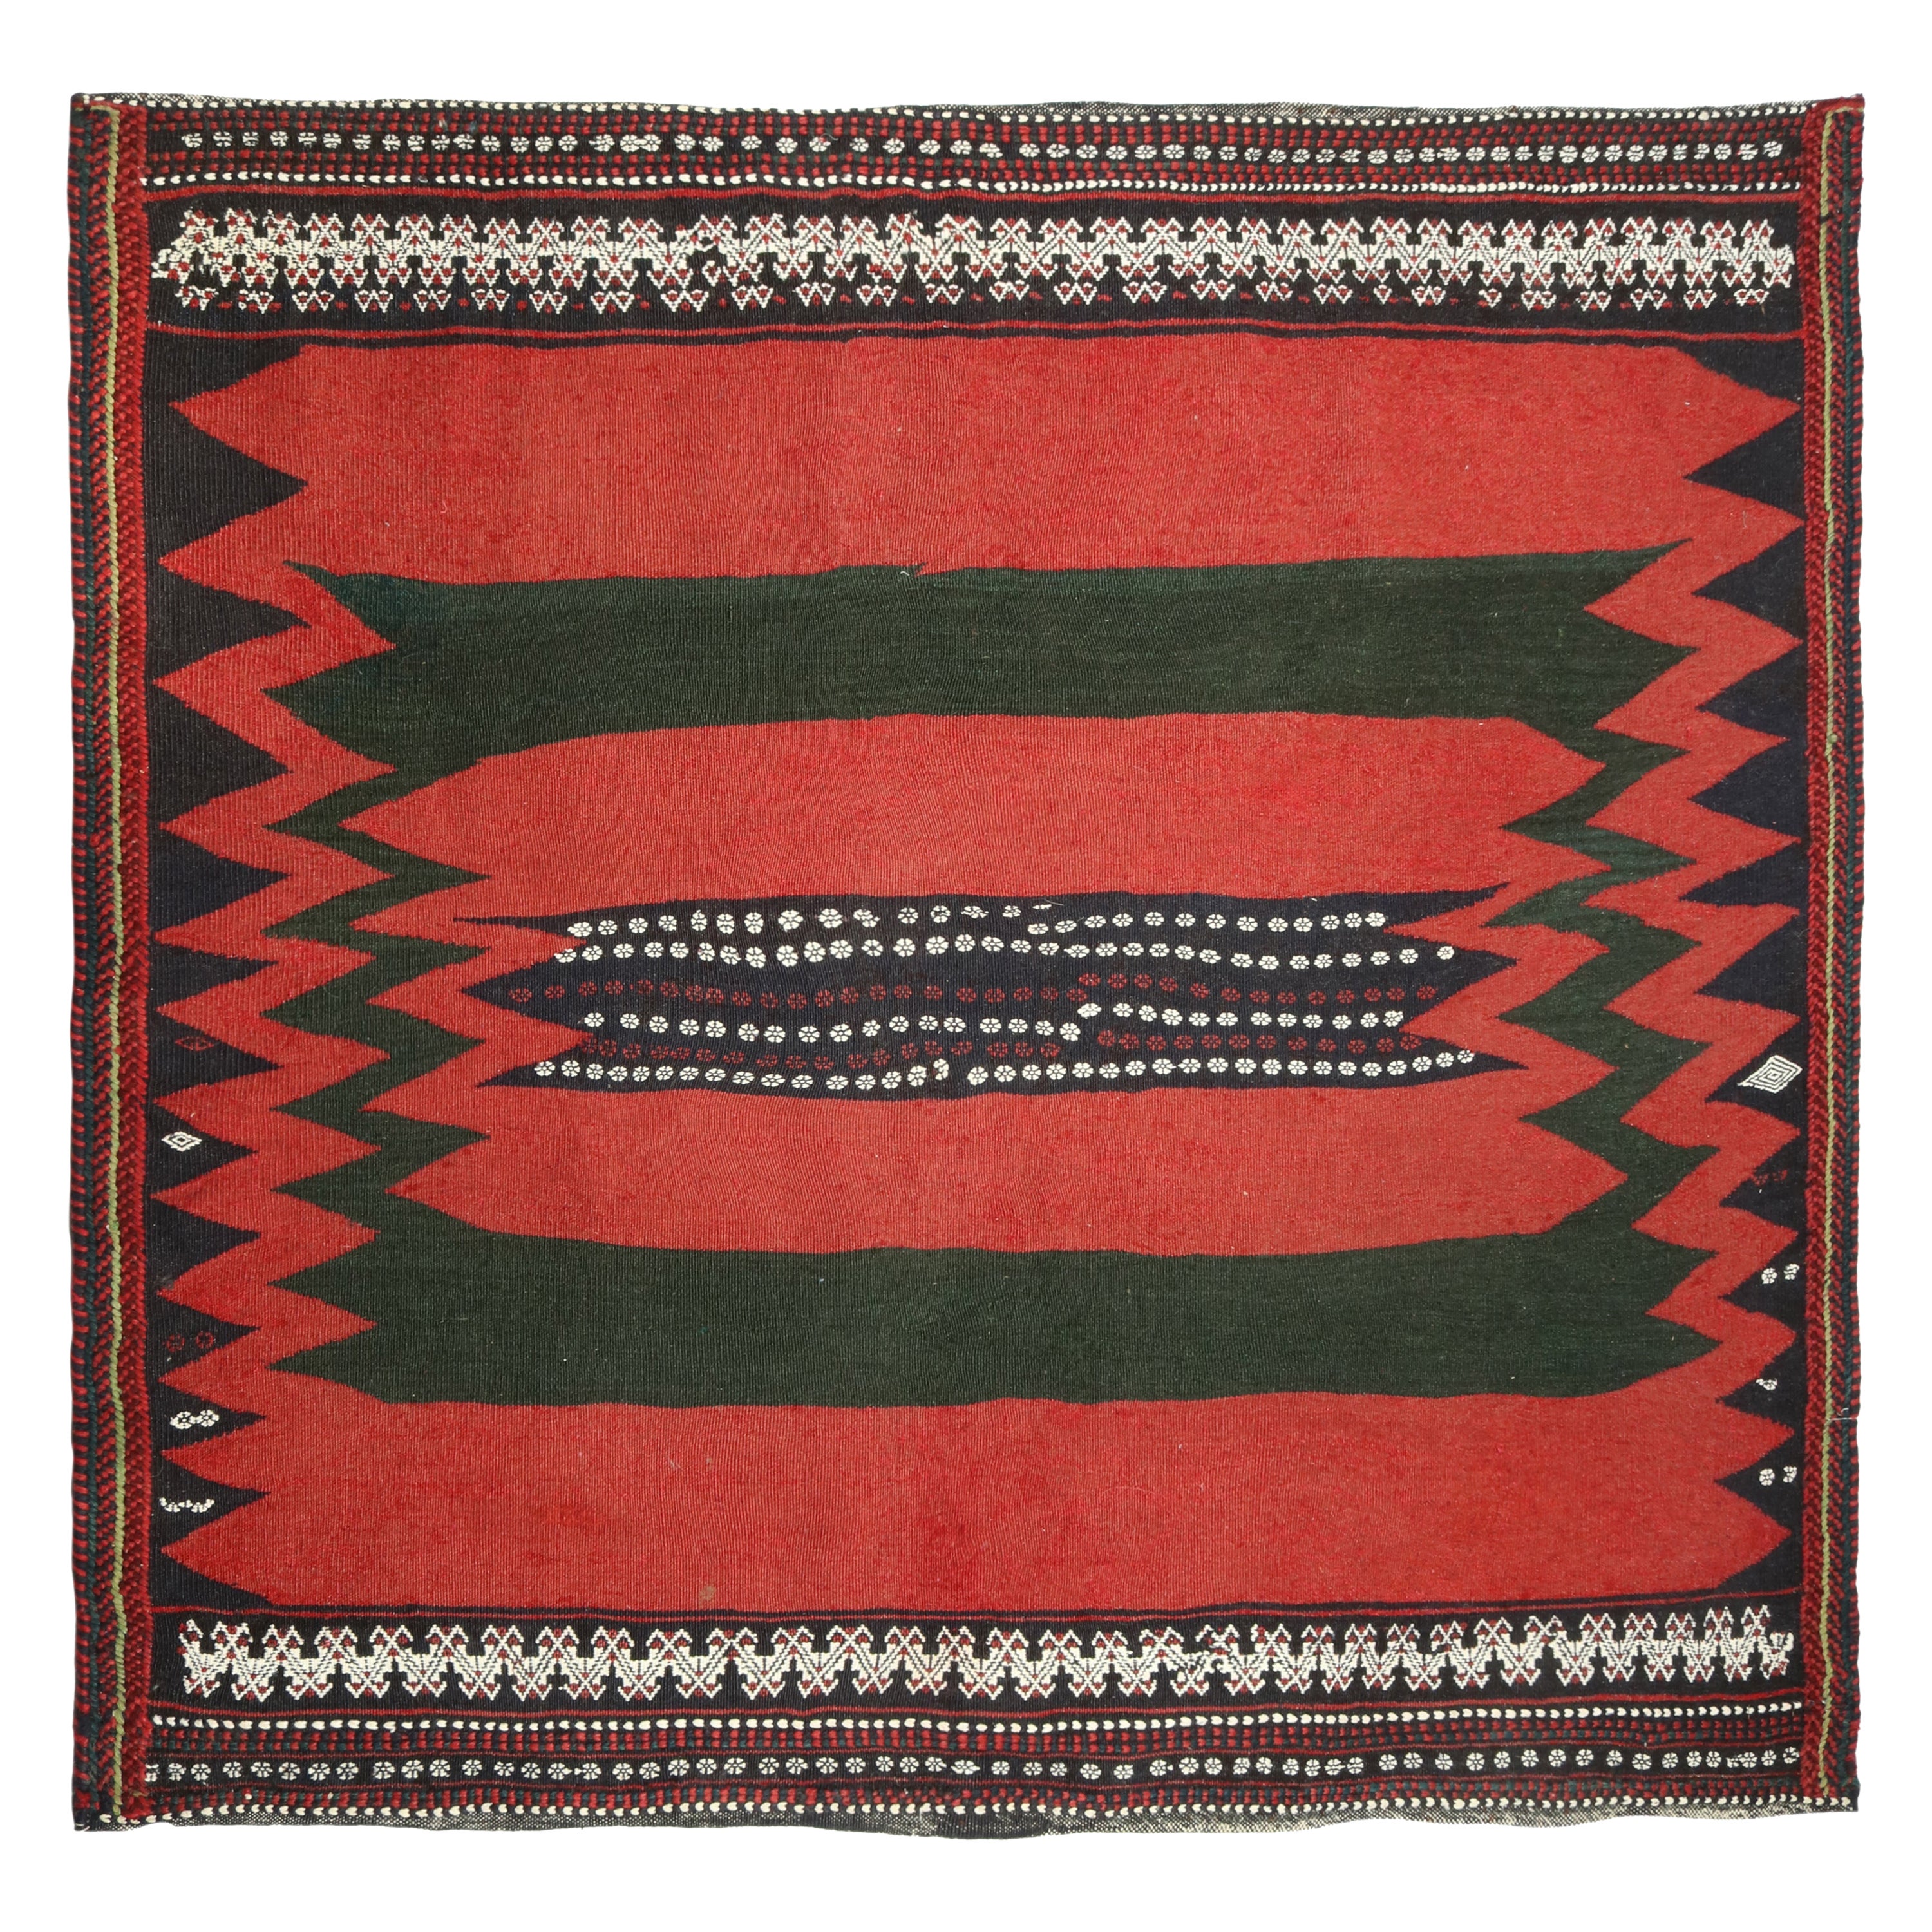 Vintage Sofreh Persian Kilim rug in Red with Geometric Patterns - by Rug & Kilim For Sale